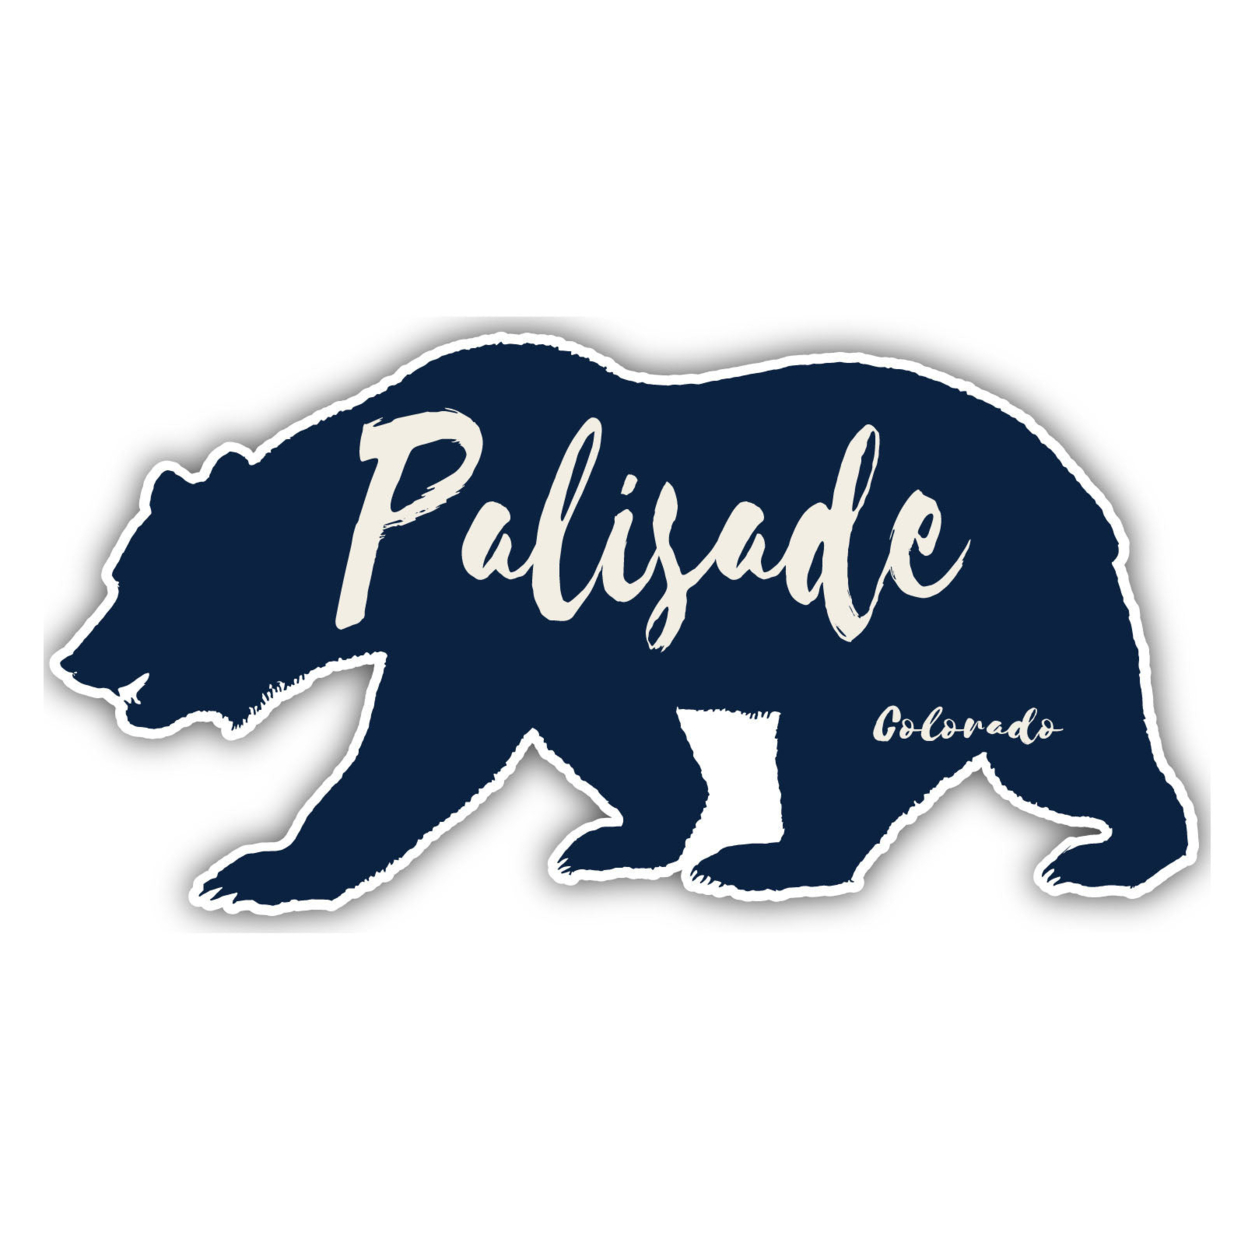 Palisade Colorado Souvenir Decorative Stickers (Choose Theme And Size) - Single Unit, 2-Inch, Great Outdoors